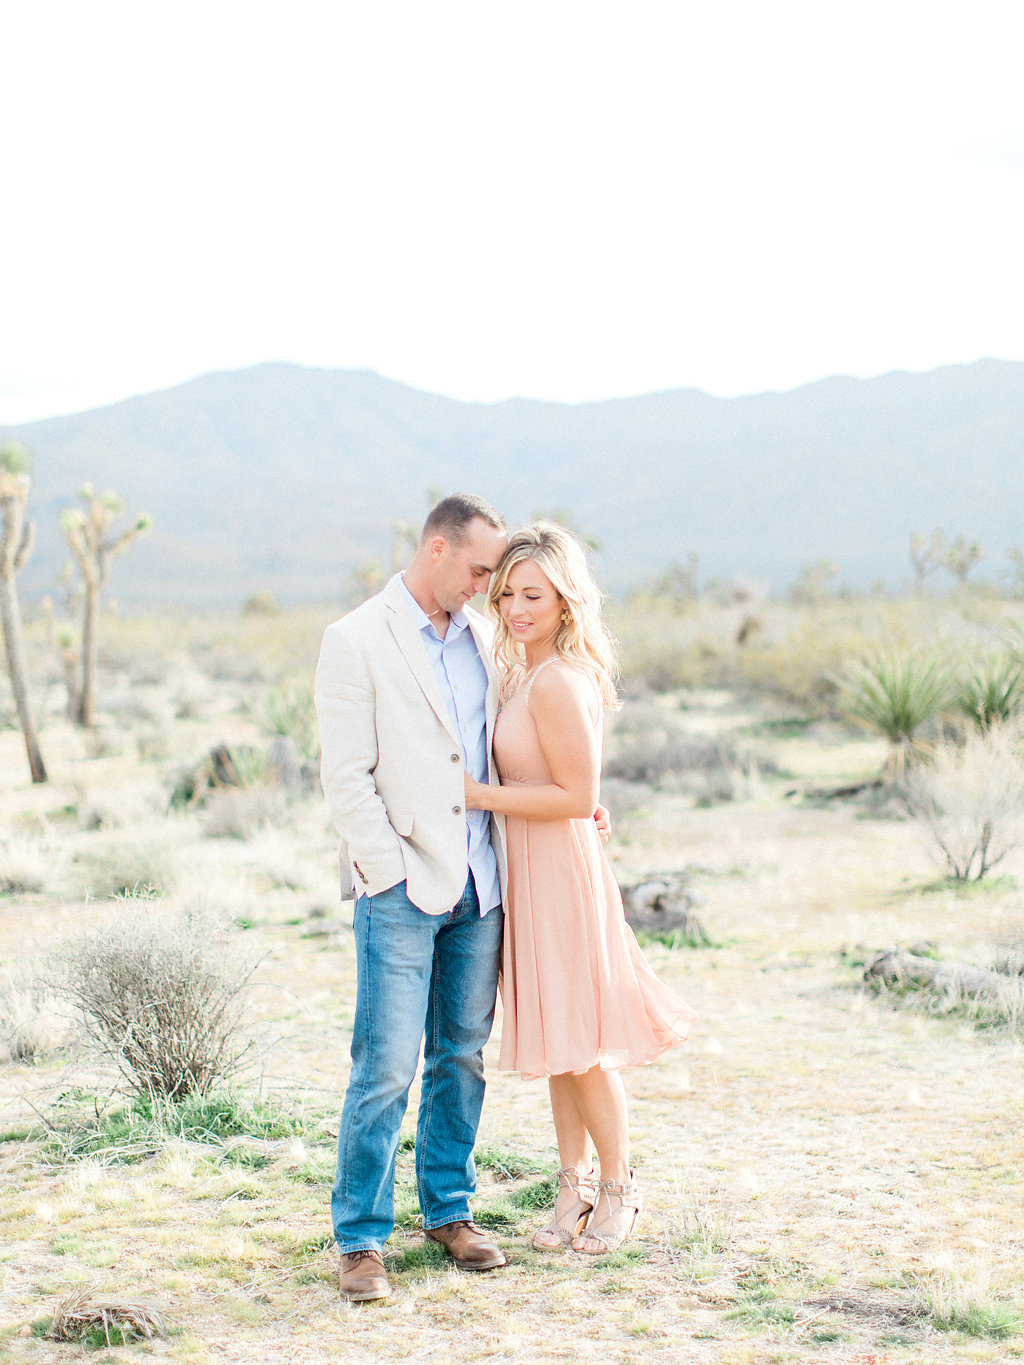 Joshua Tree Engagement Session | What to Wear for Pictures | Southern California Wedding Photographer | Mastin Labs Fuji Film | Fine Art Photographer | Desert Shoot | Perfect Posing.jpg